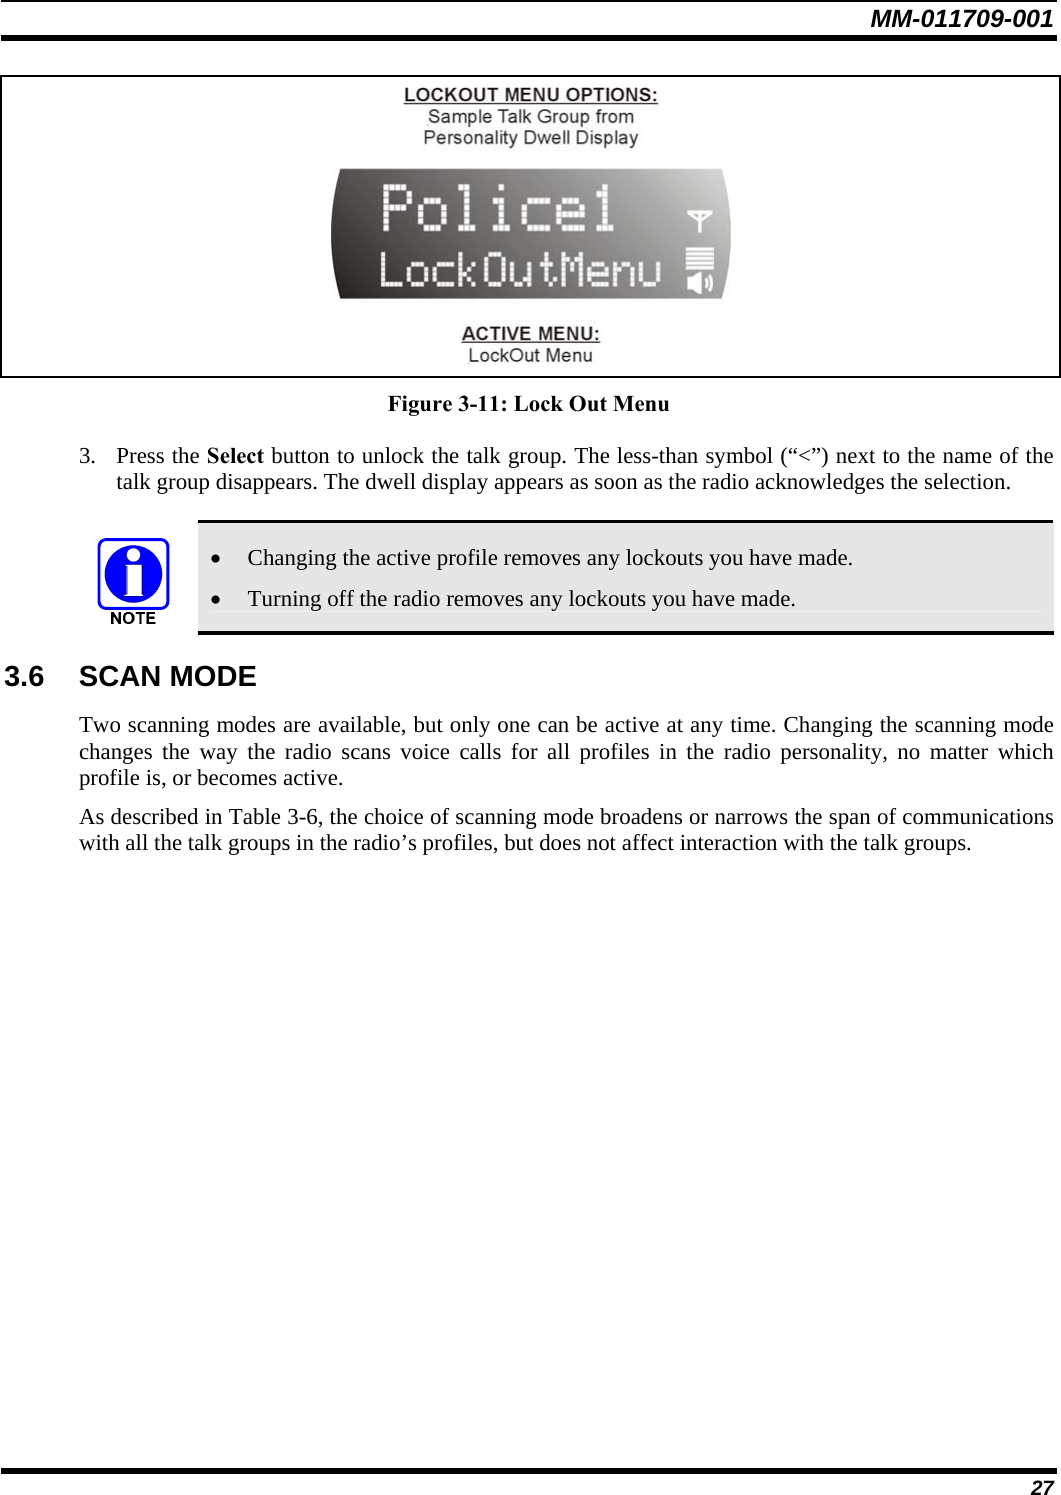 MM-011709-001 27  Figure 3-11: Lock Out Menu 3. Press the Select button to unlock the talk group. The less-than symbol (“&lt;”) next to the name of the talk group disappears. The dwell display appears as soon as the radio acknowledges the selection.  • Changing the active profile removes any lockouts you have made. • Turning off the radio removes any lockouts you have made. 3.6 SCAN MODE Two scanning modes are available, but only one can be active at any time. Changing the scanning mode changes the way the radio scans voice calls for all profiles in the radio personality, no matter which profile is, or becomes active. As described in Table 3-6, the choice of scanning mode broadens or narrows the span of communications with all the talk groups in the radio’s profiles, but does not affect interaction with the talk groups. 